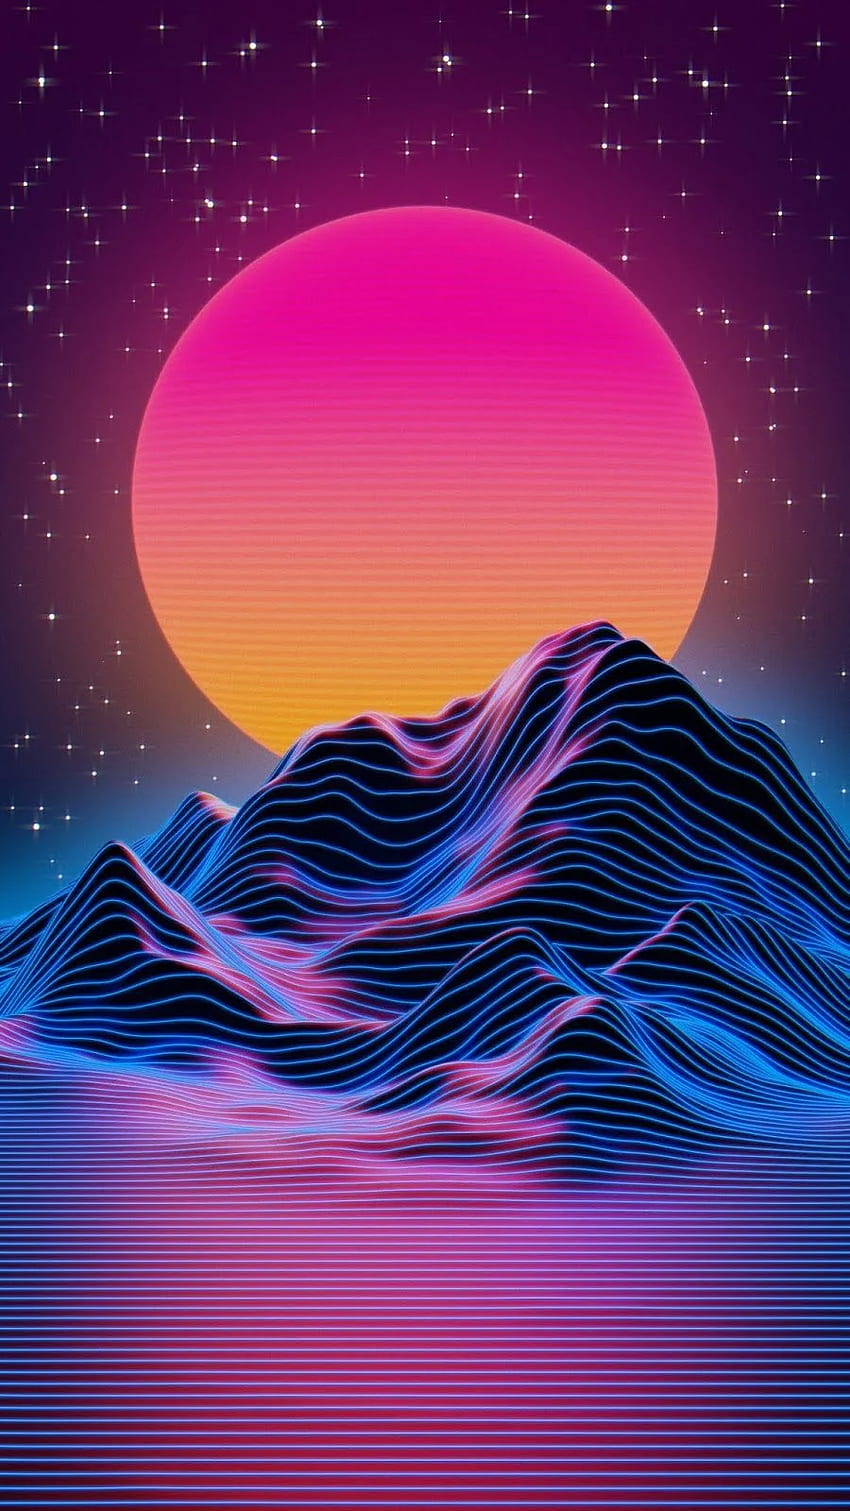 AESTHETIC VAPORWAVE PHONE COLLECTION 192. Cool - in 2020. Vaporwave , Synthwave art, iPhone, Vibey HD phone wallpaper